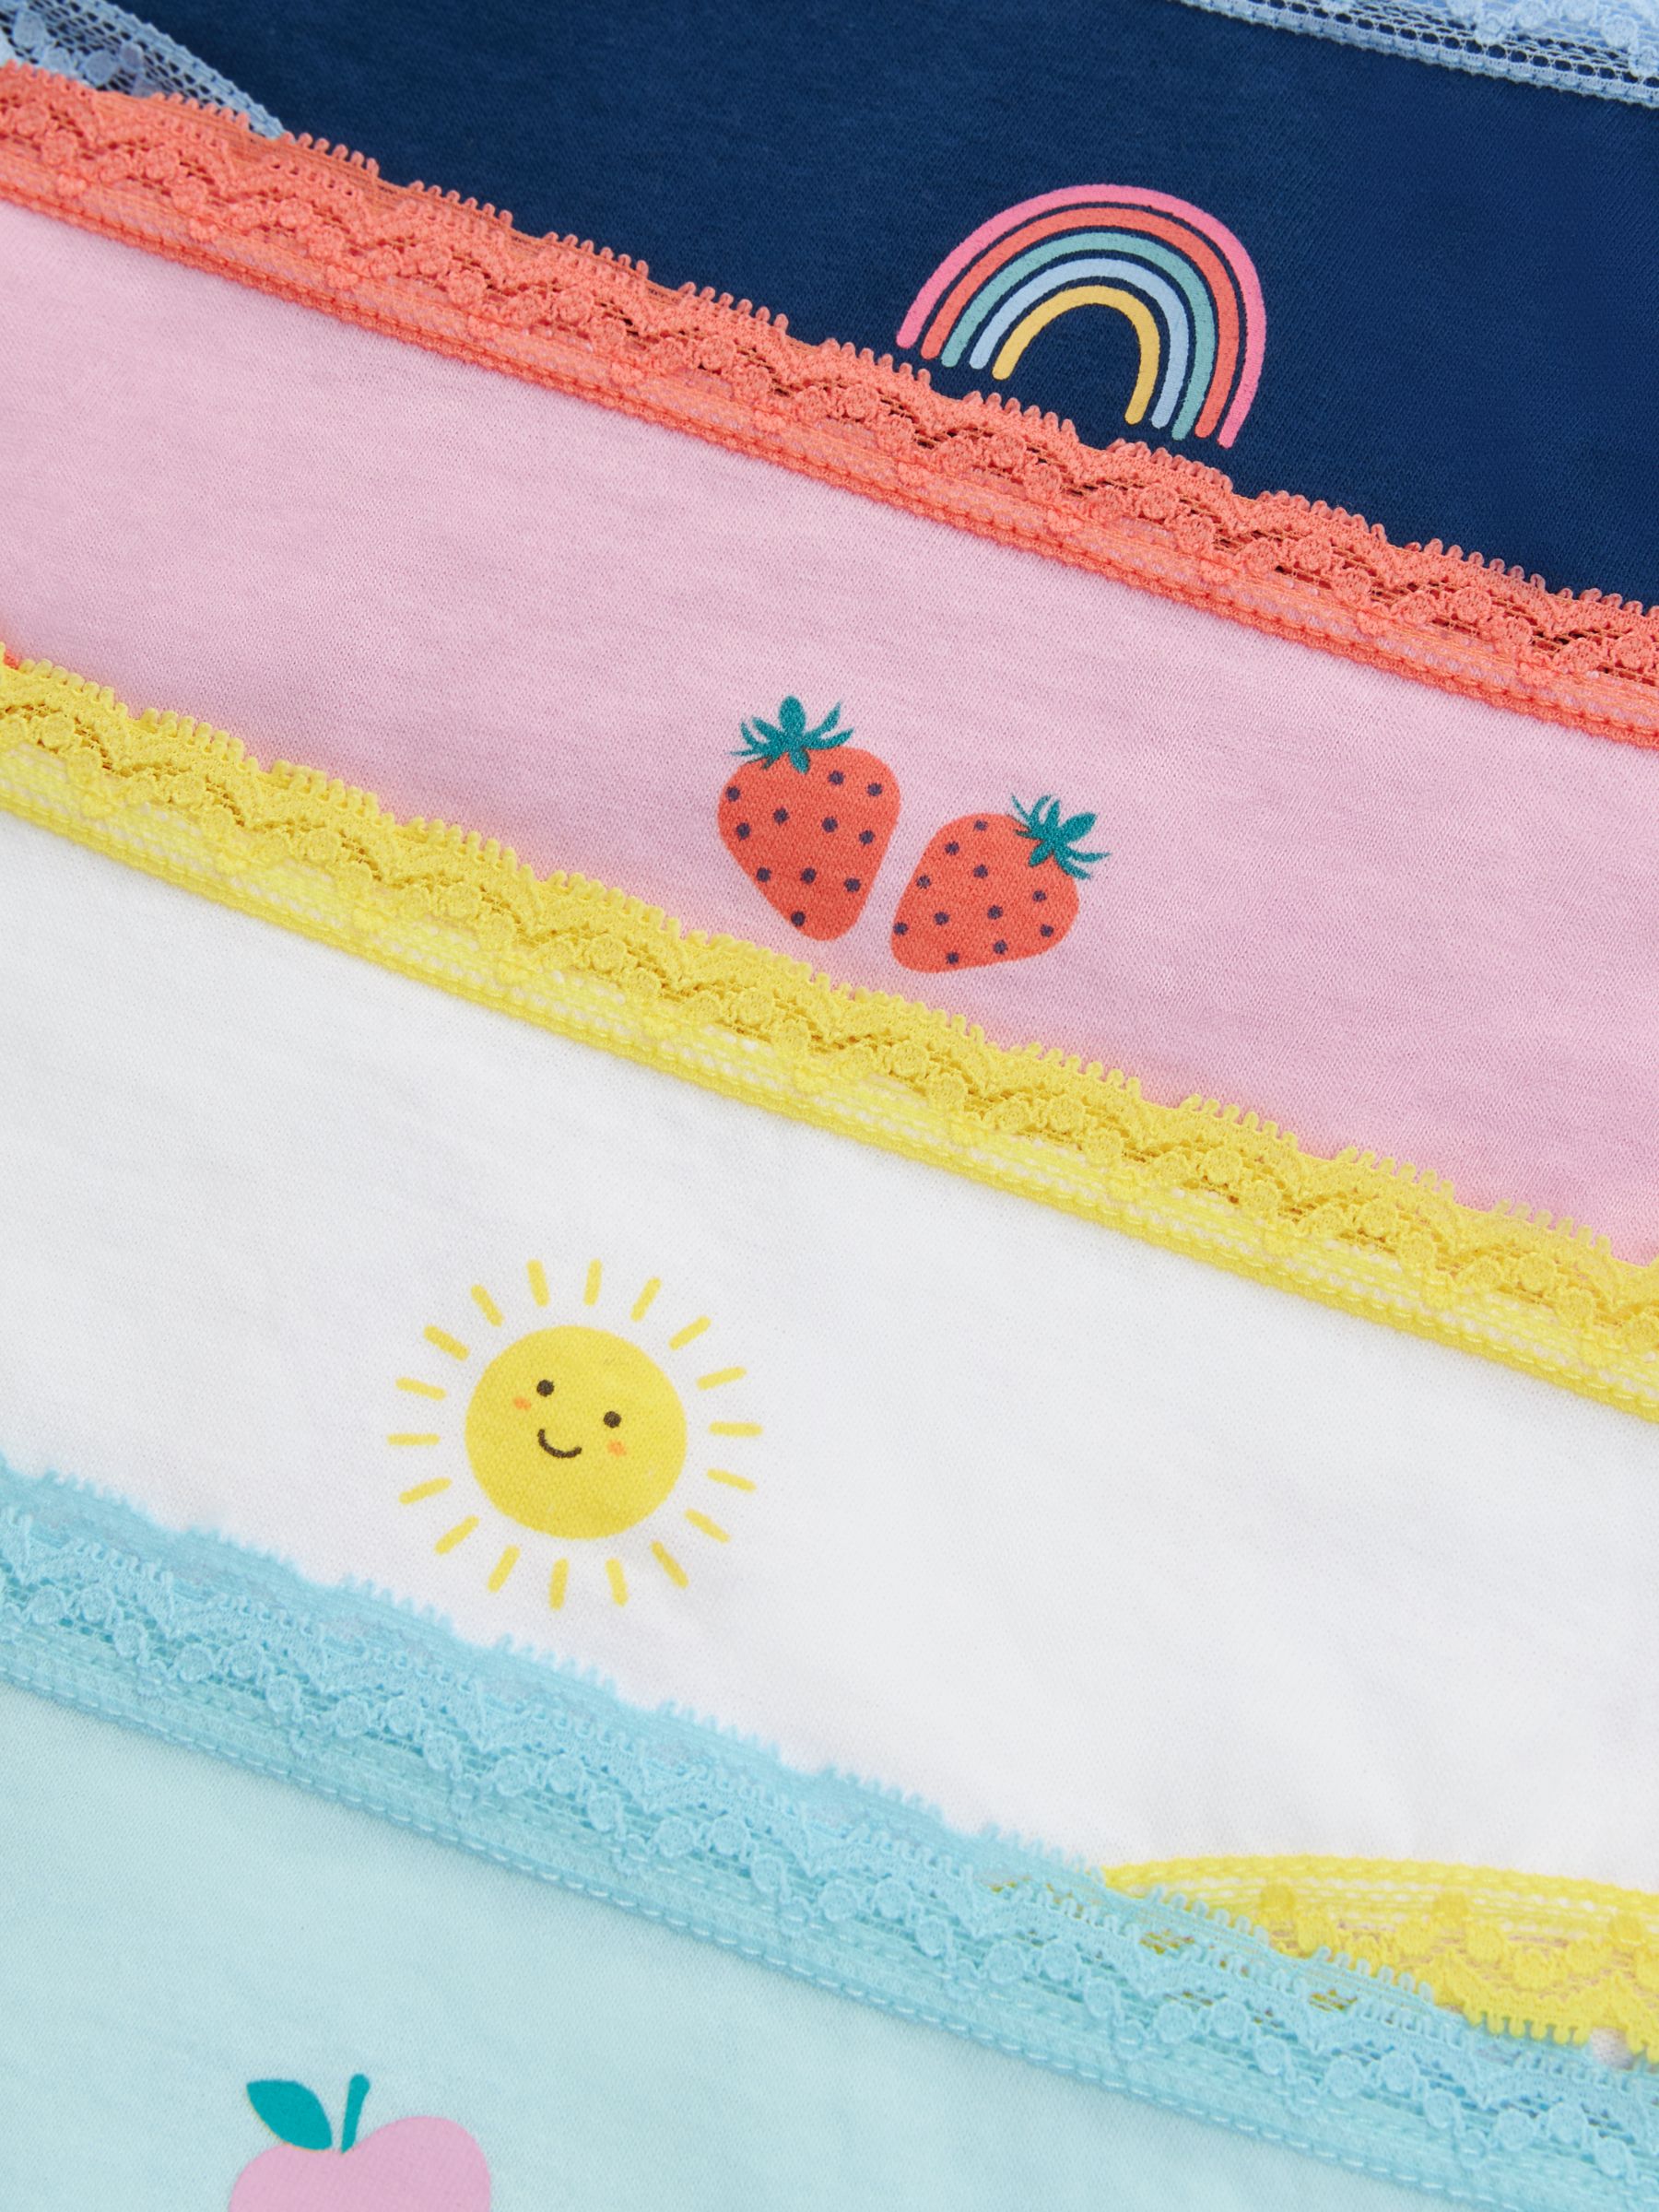 John Lewis Kids' Sunny Fruit Lace Trim Knickers, Pack of 5, Multi